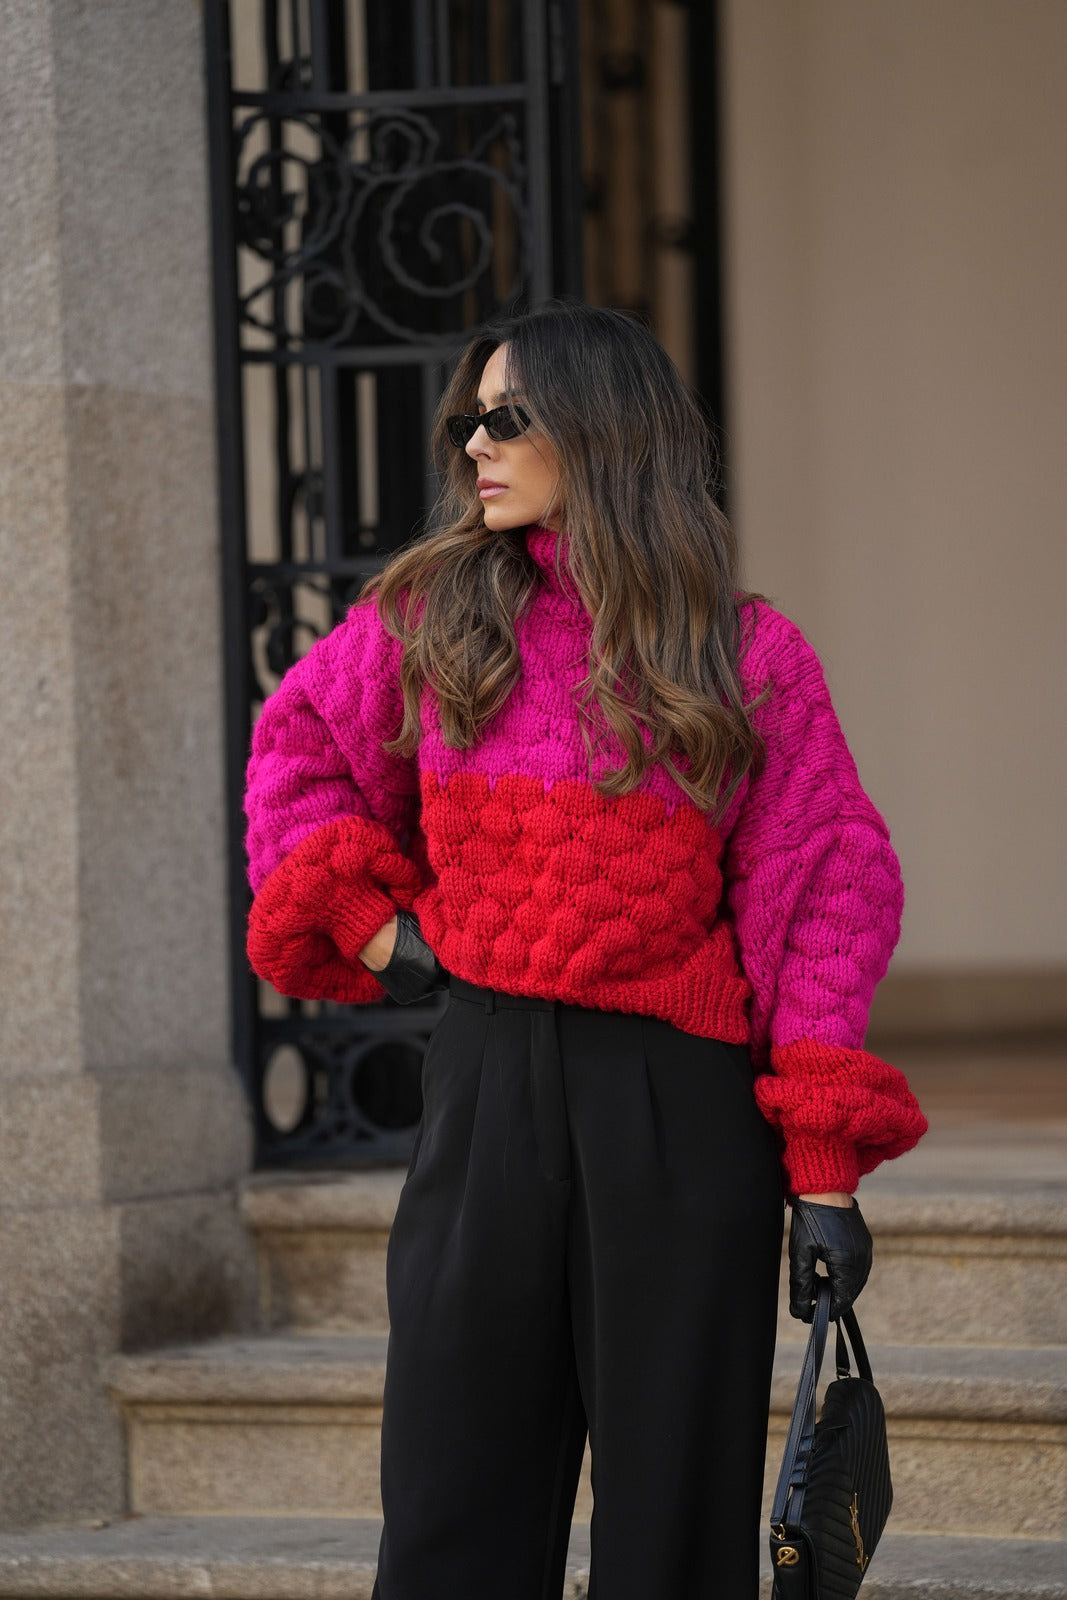 MULTICOLORED KNITTED SWEATER